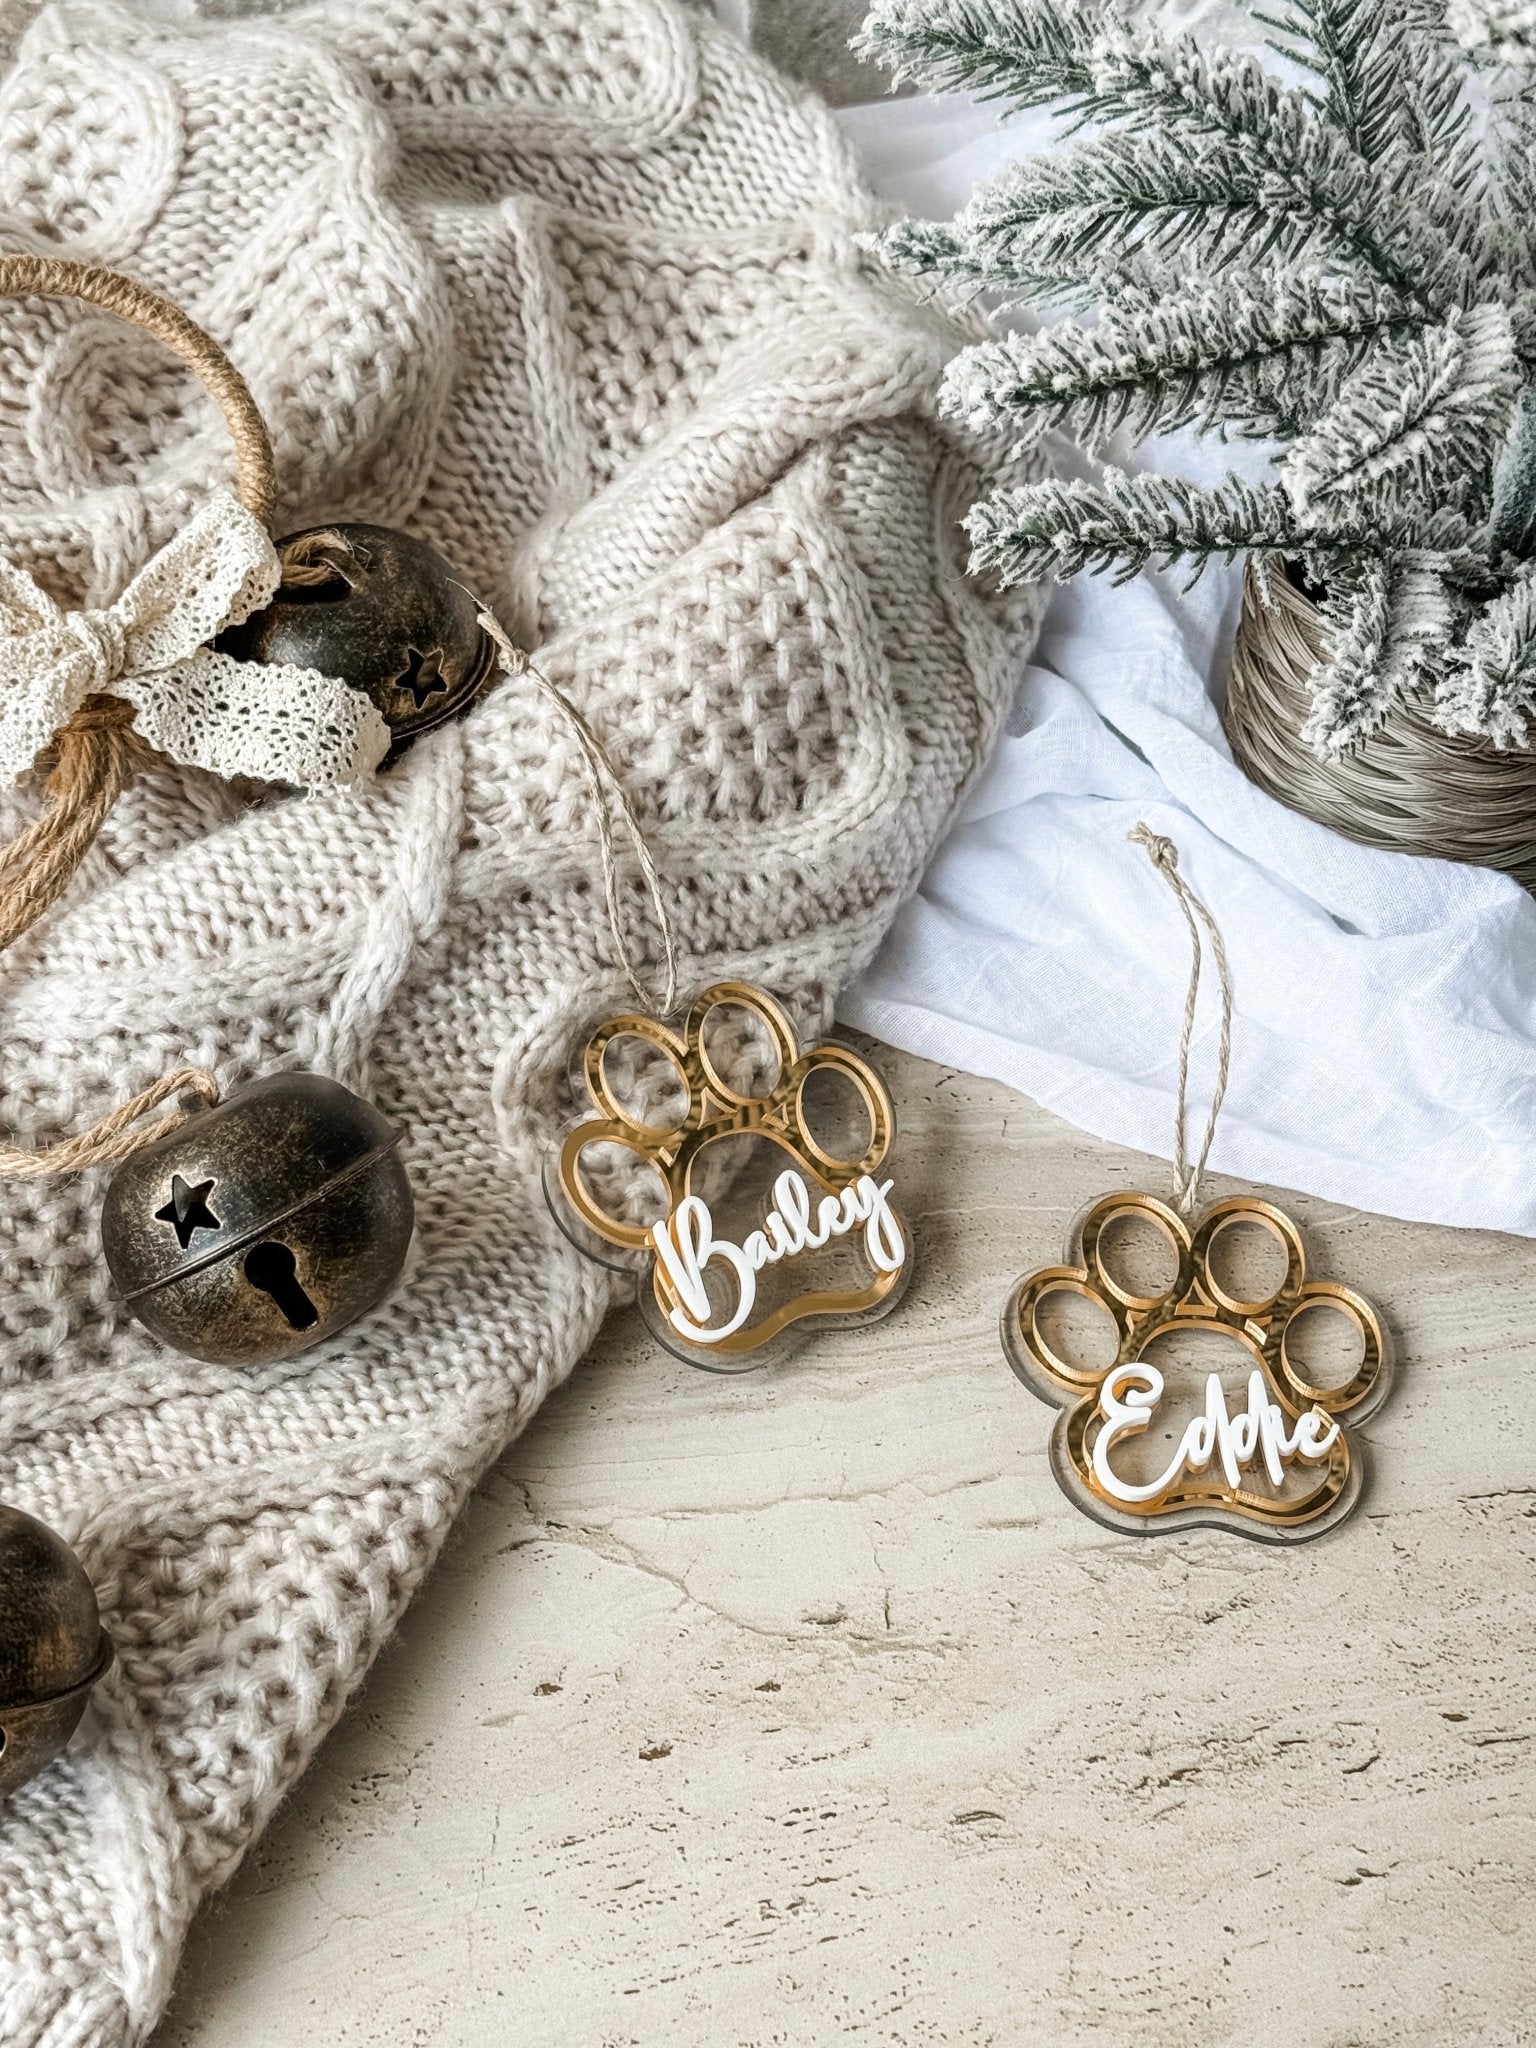 Animal Paw Print Ornament - The Humble Gift Co.